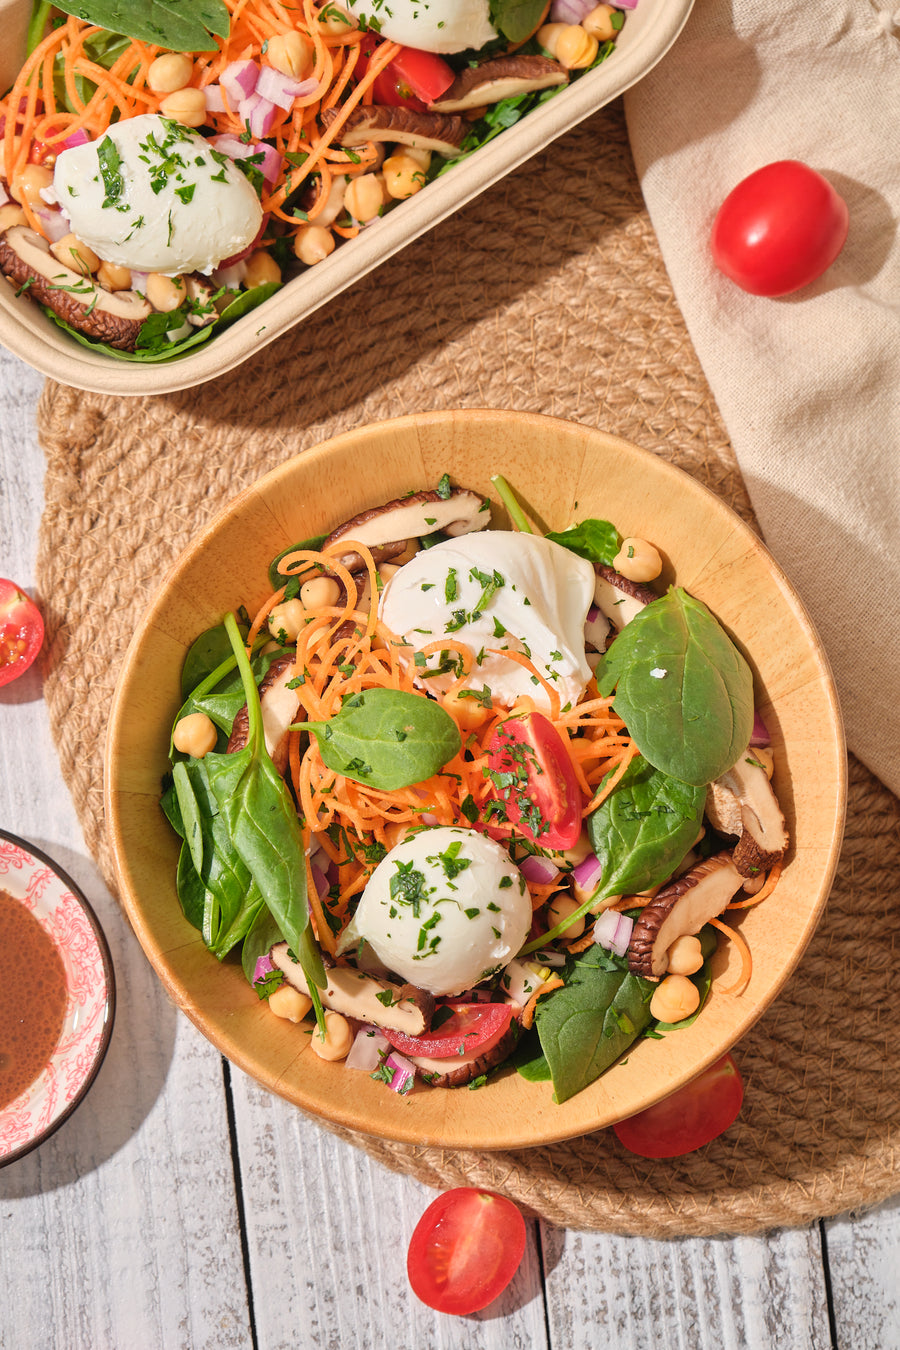 Chickpea & Spinach Salad with Shiitake Mushrooms, Poached Egg & Soy Truffle Vinaigrette